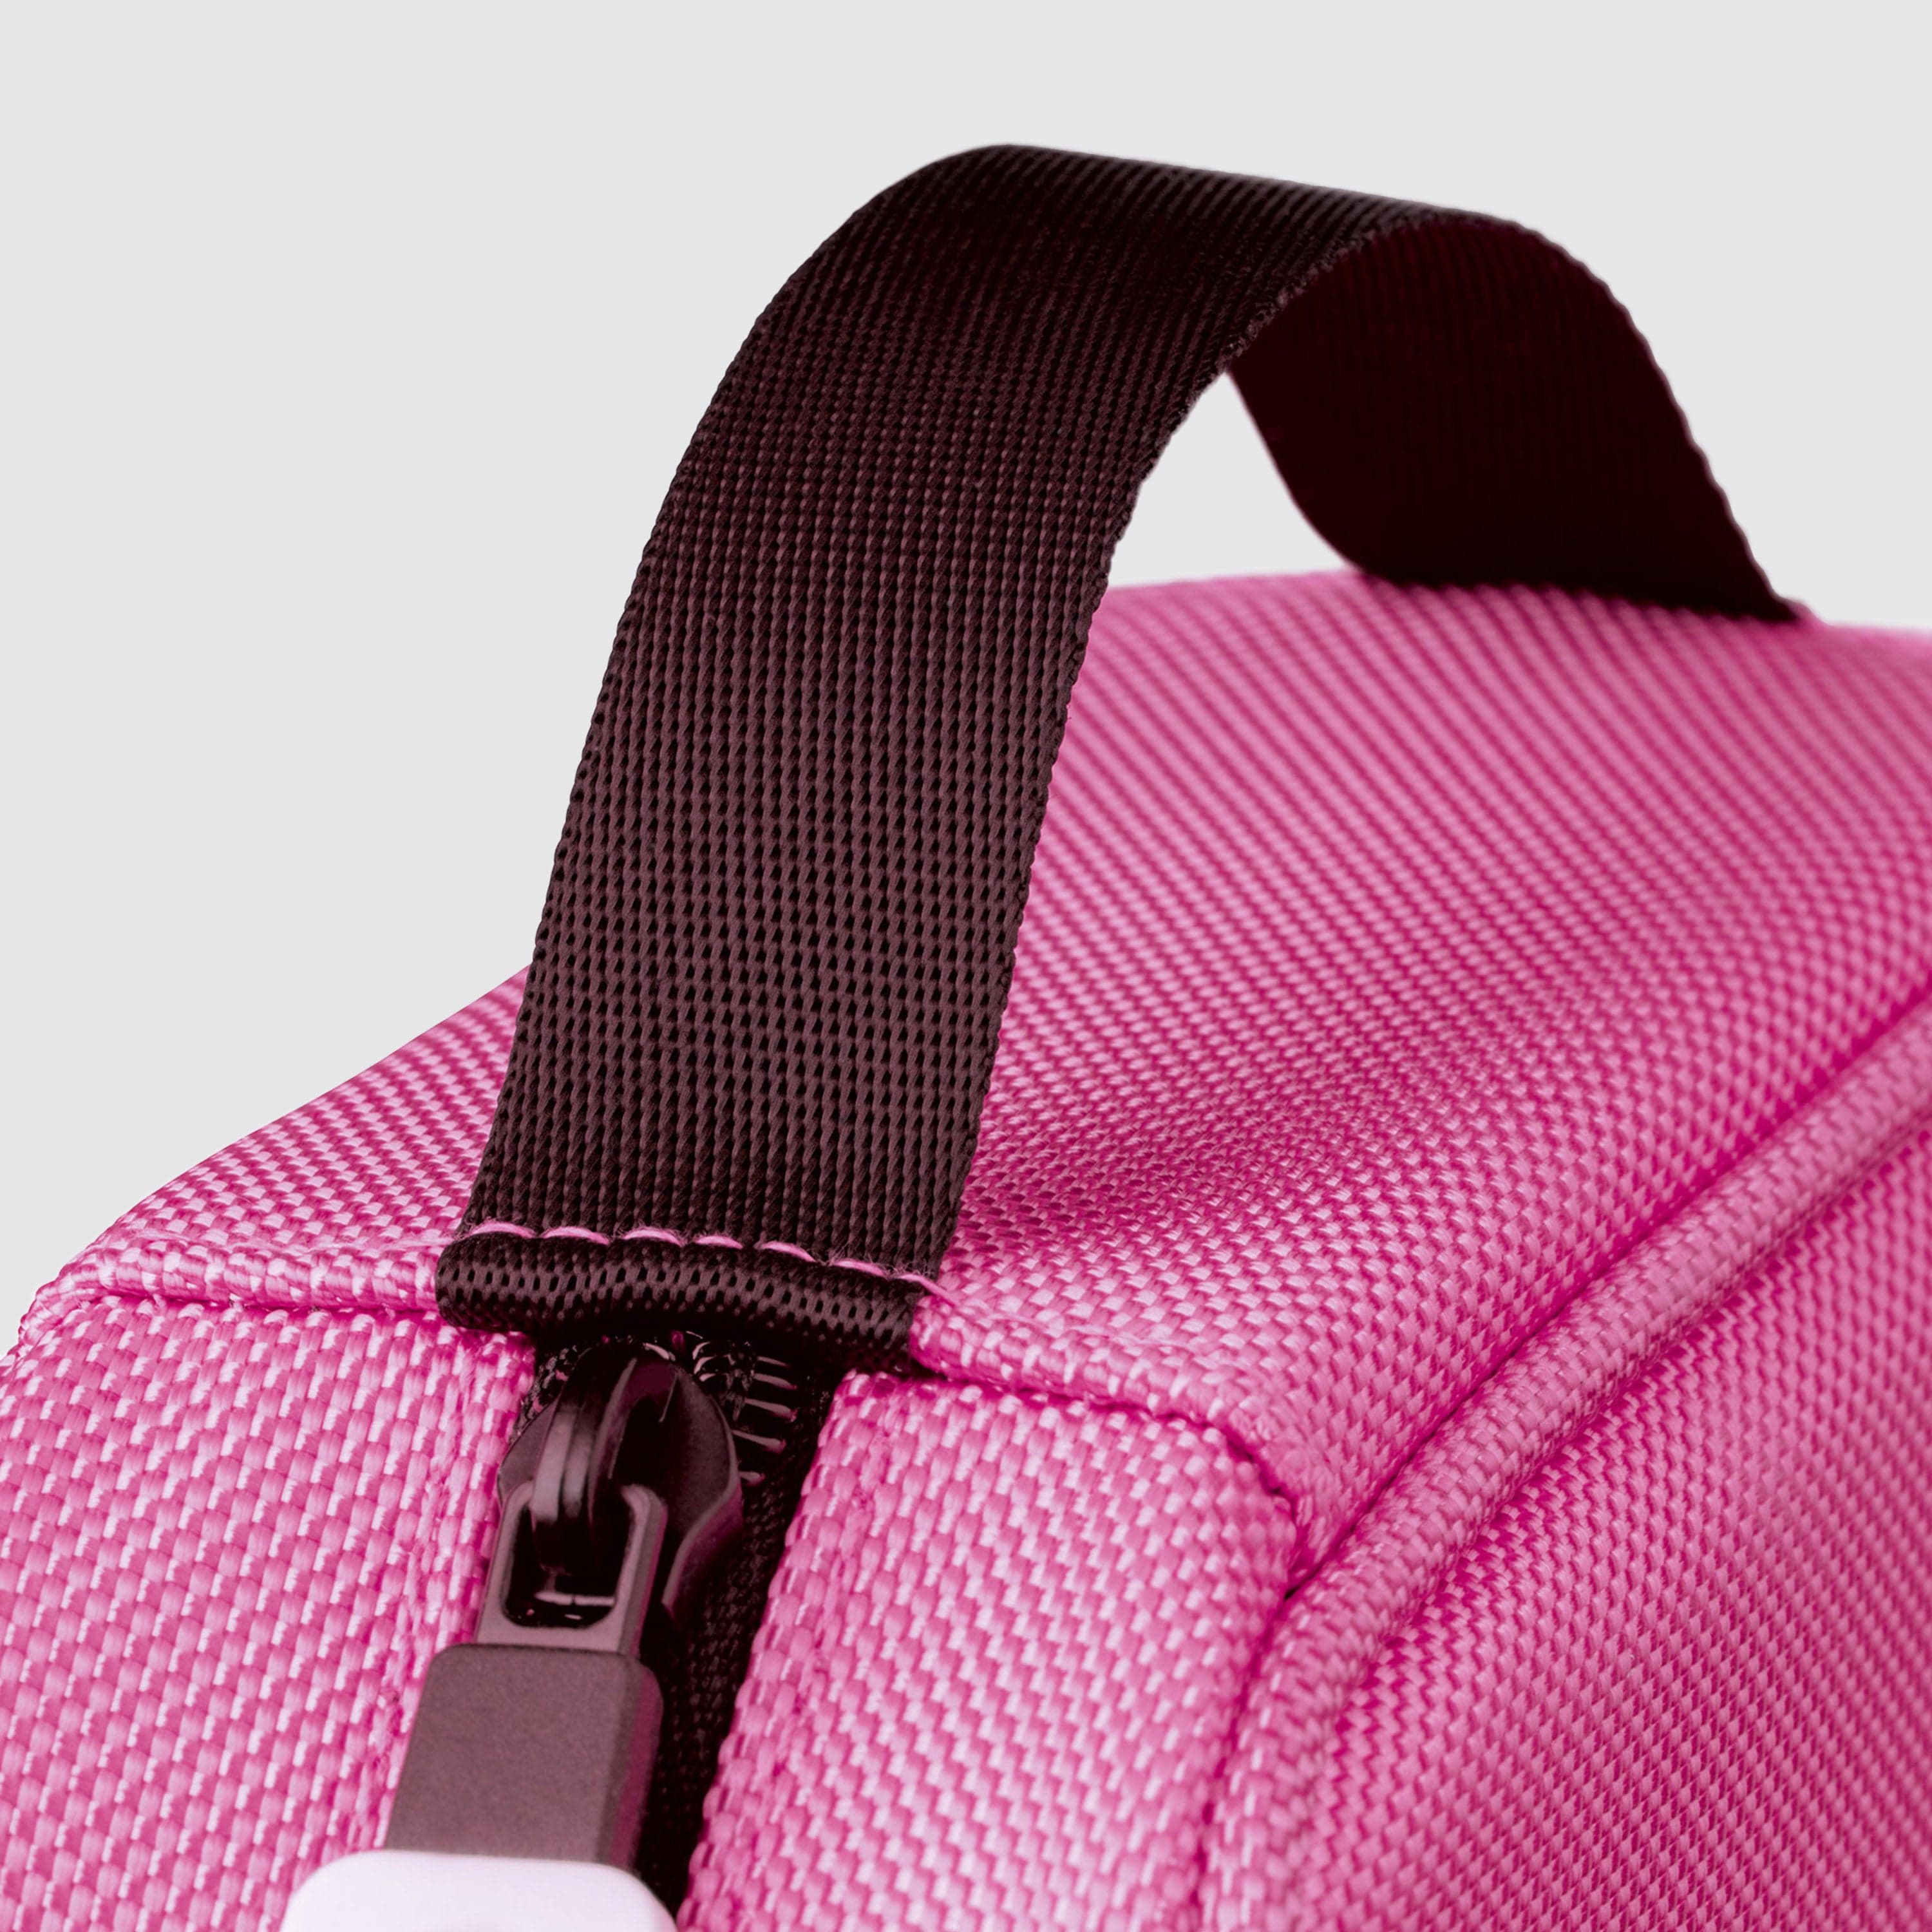 Tonies - Carrying Case (Pink)